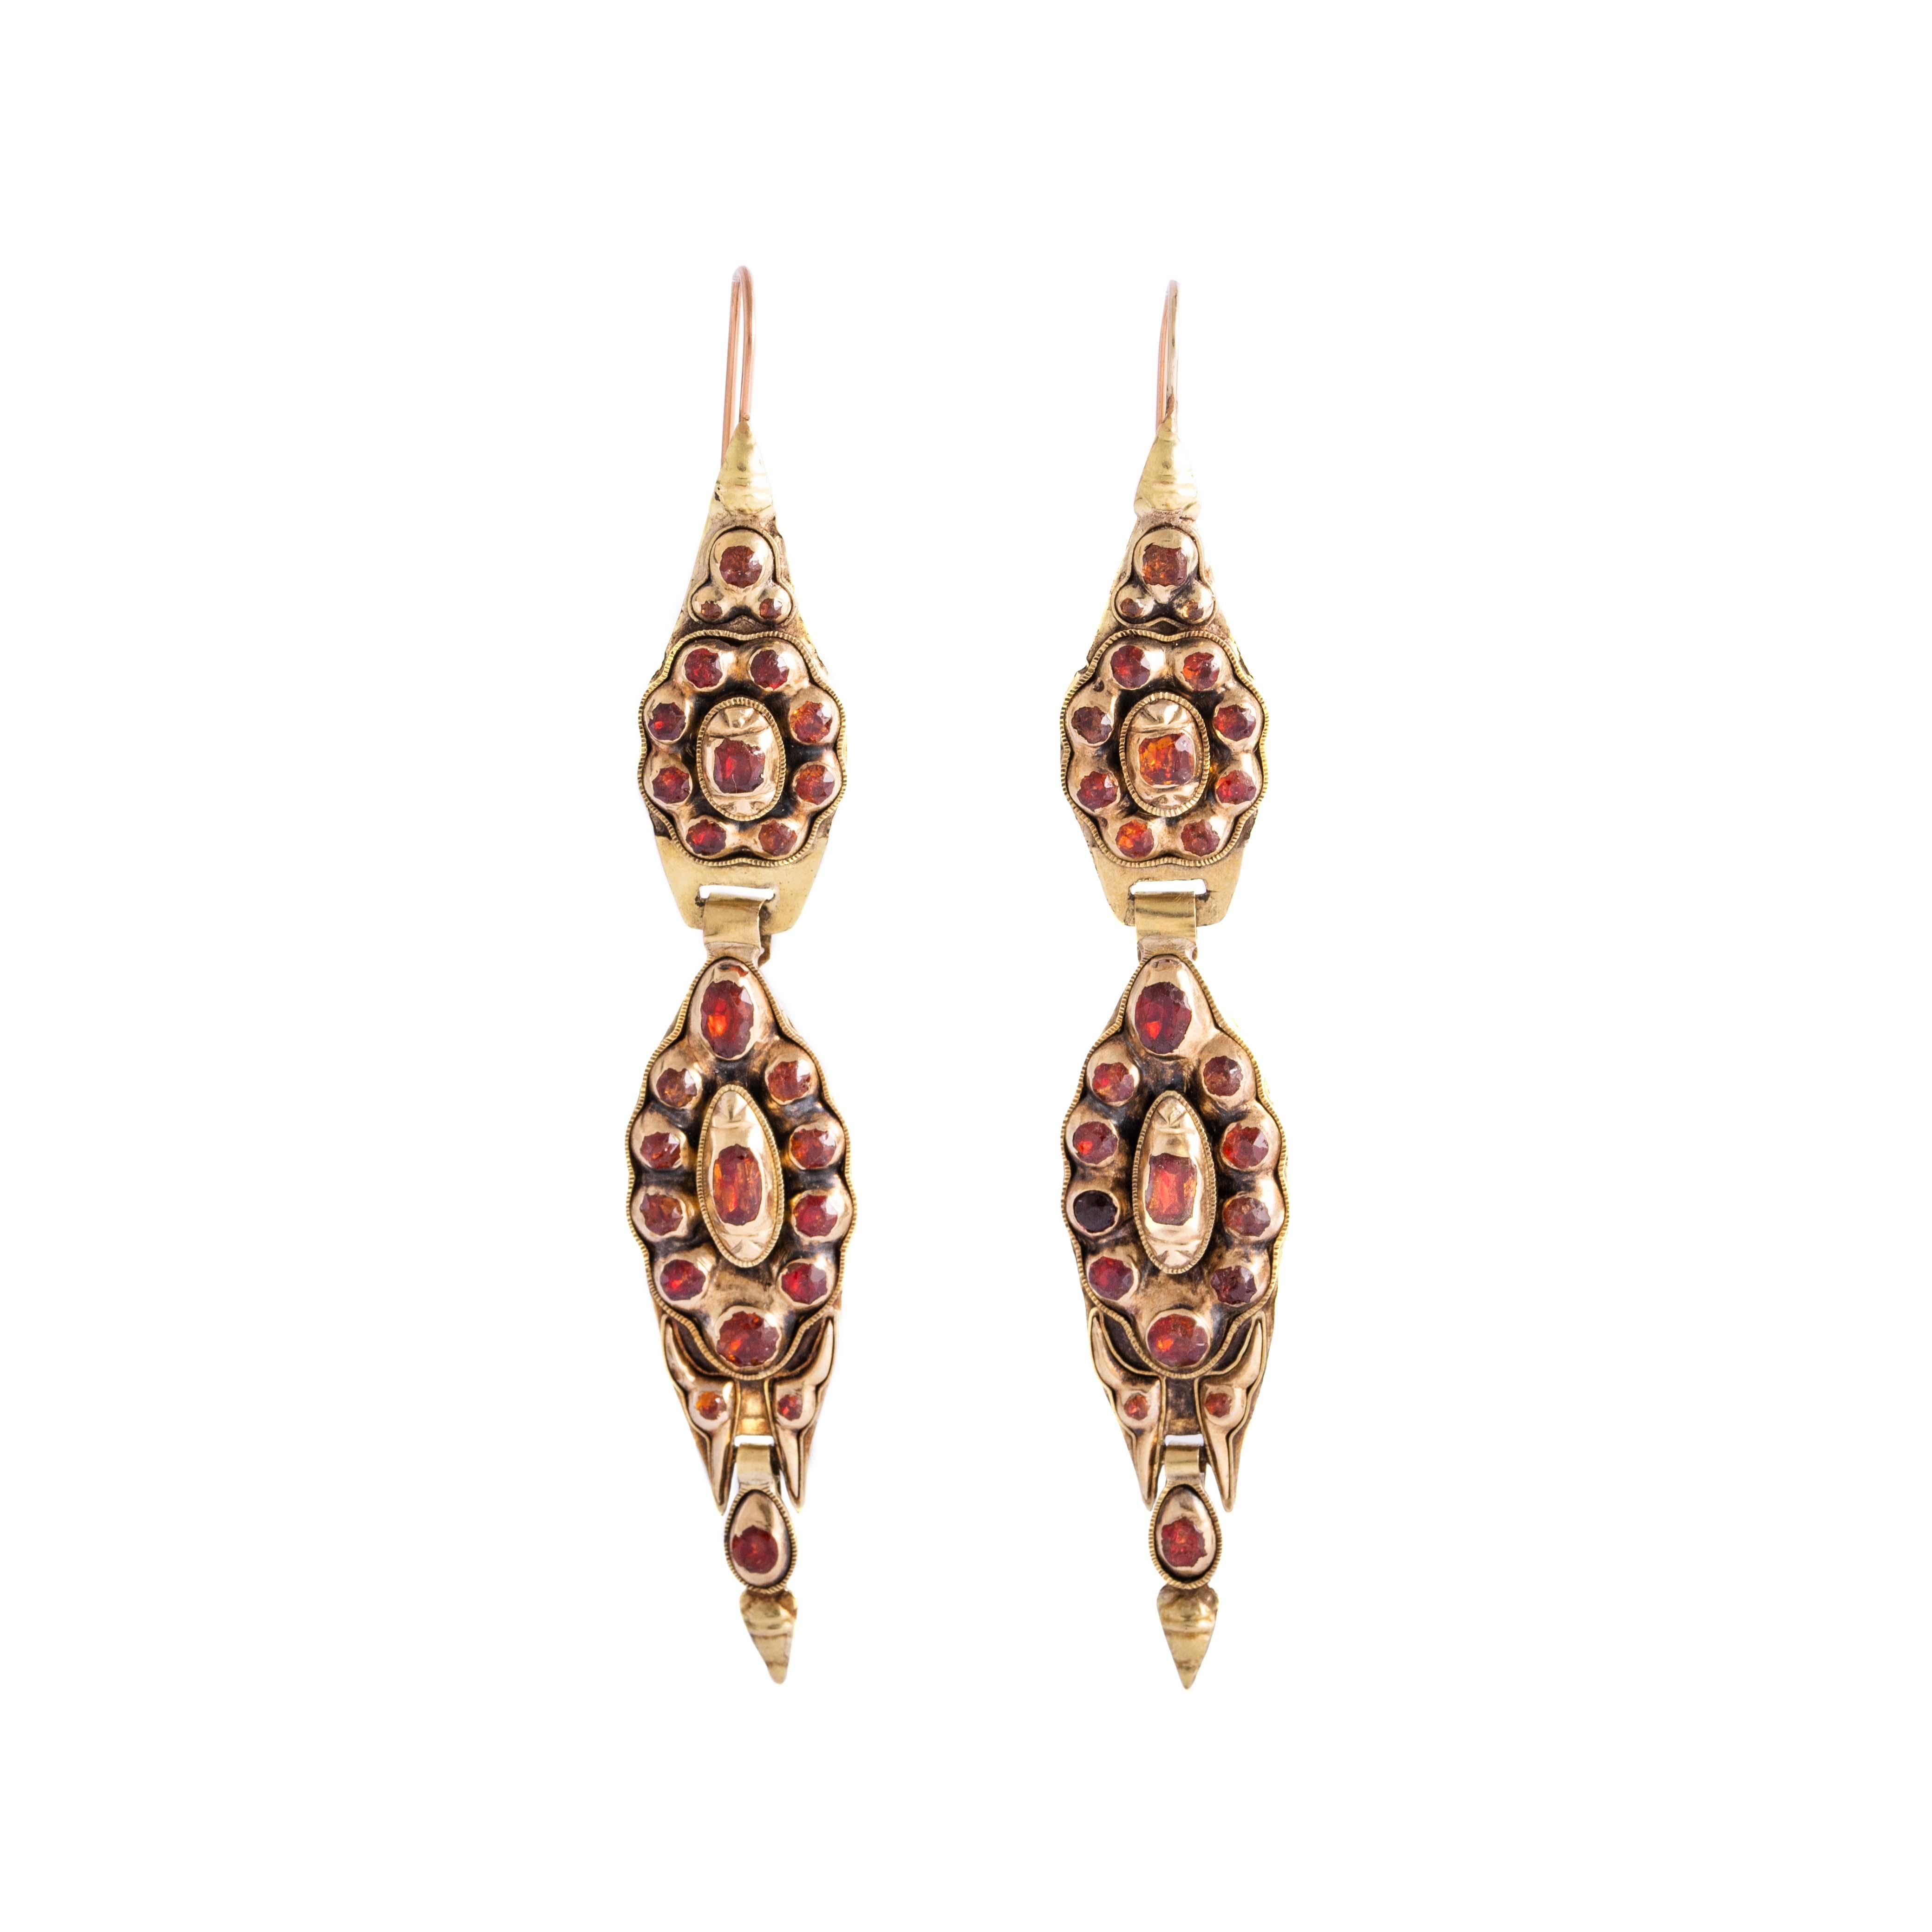 Pair of 14K yellow gold earrings set with orange stones. Iberian work.
Height: 9.50 centimeters. 
Gross weight: 14.86 grams.